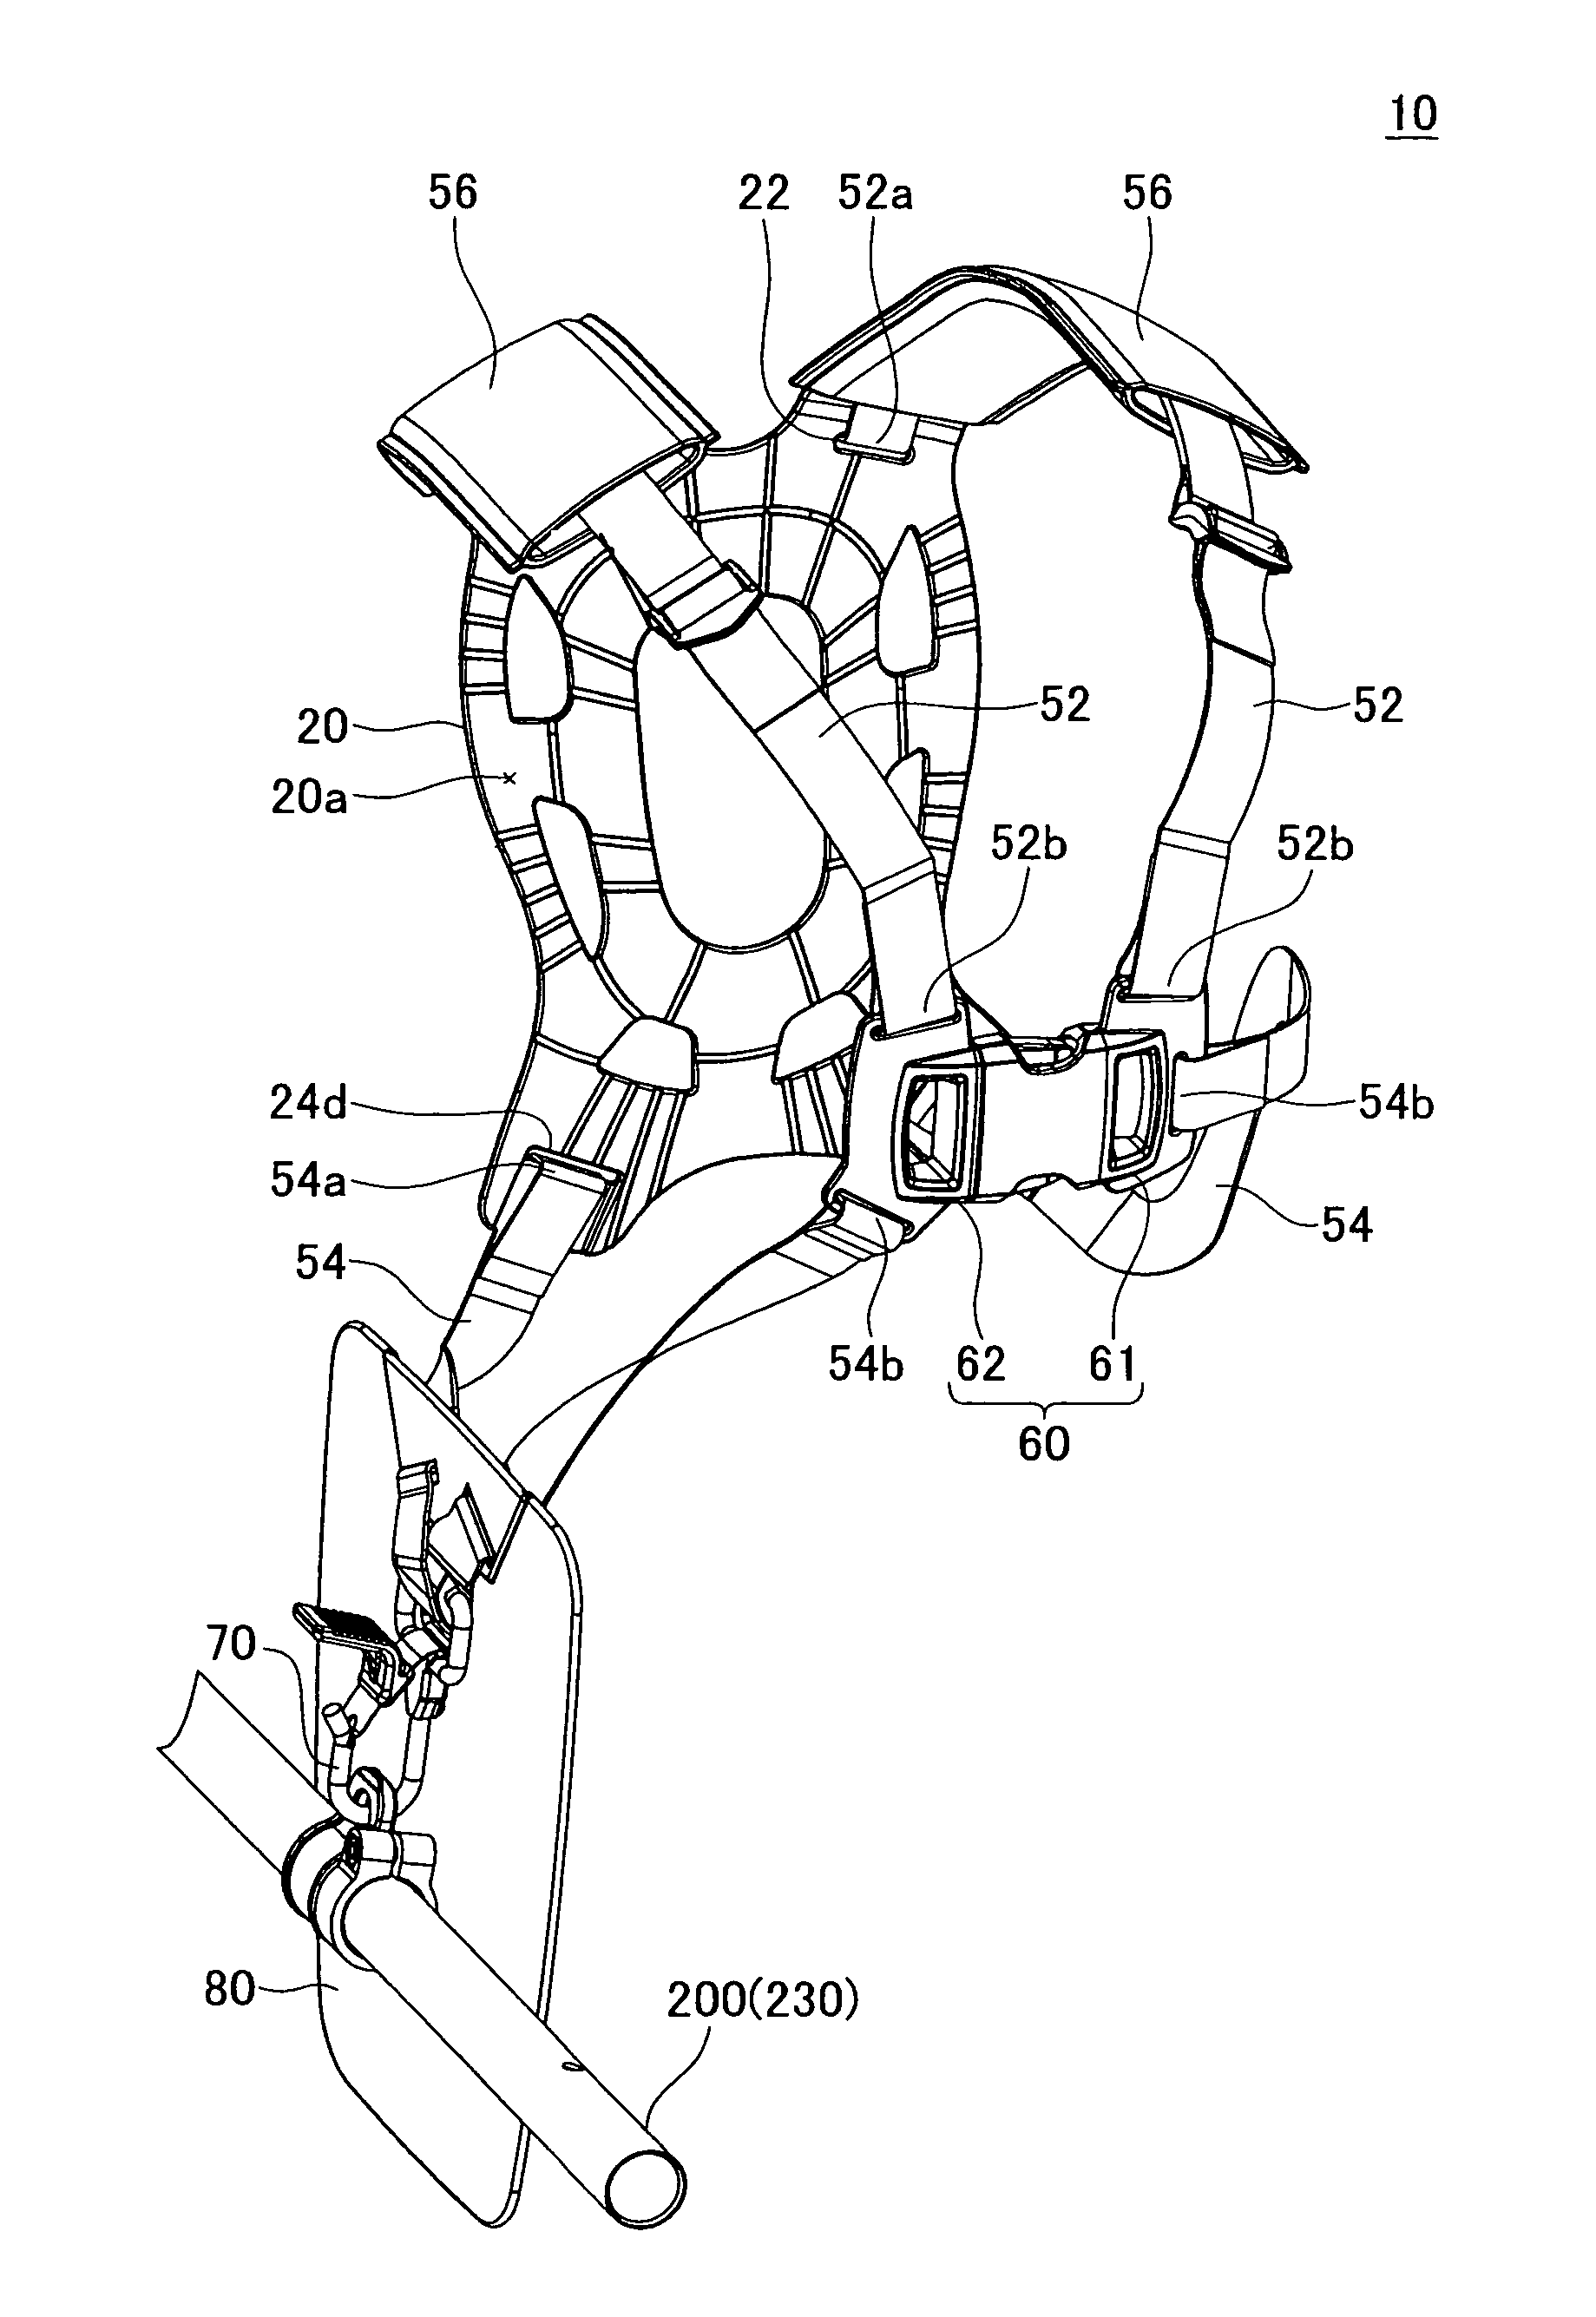 Harness for a handheld power equipment